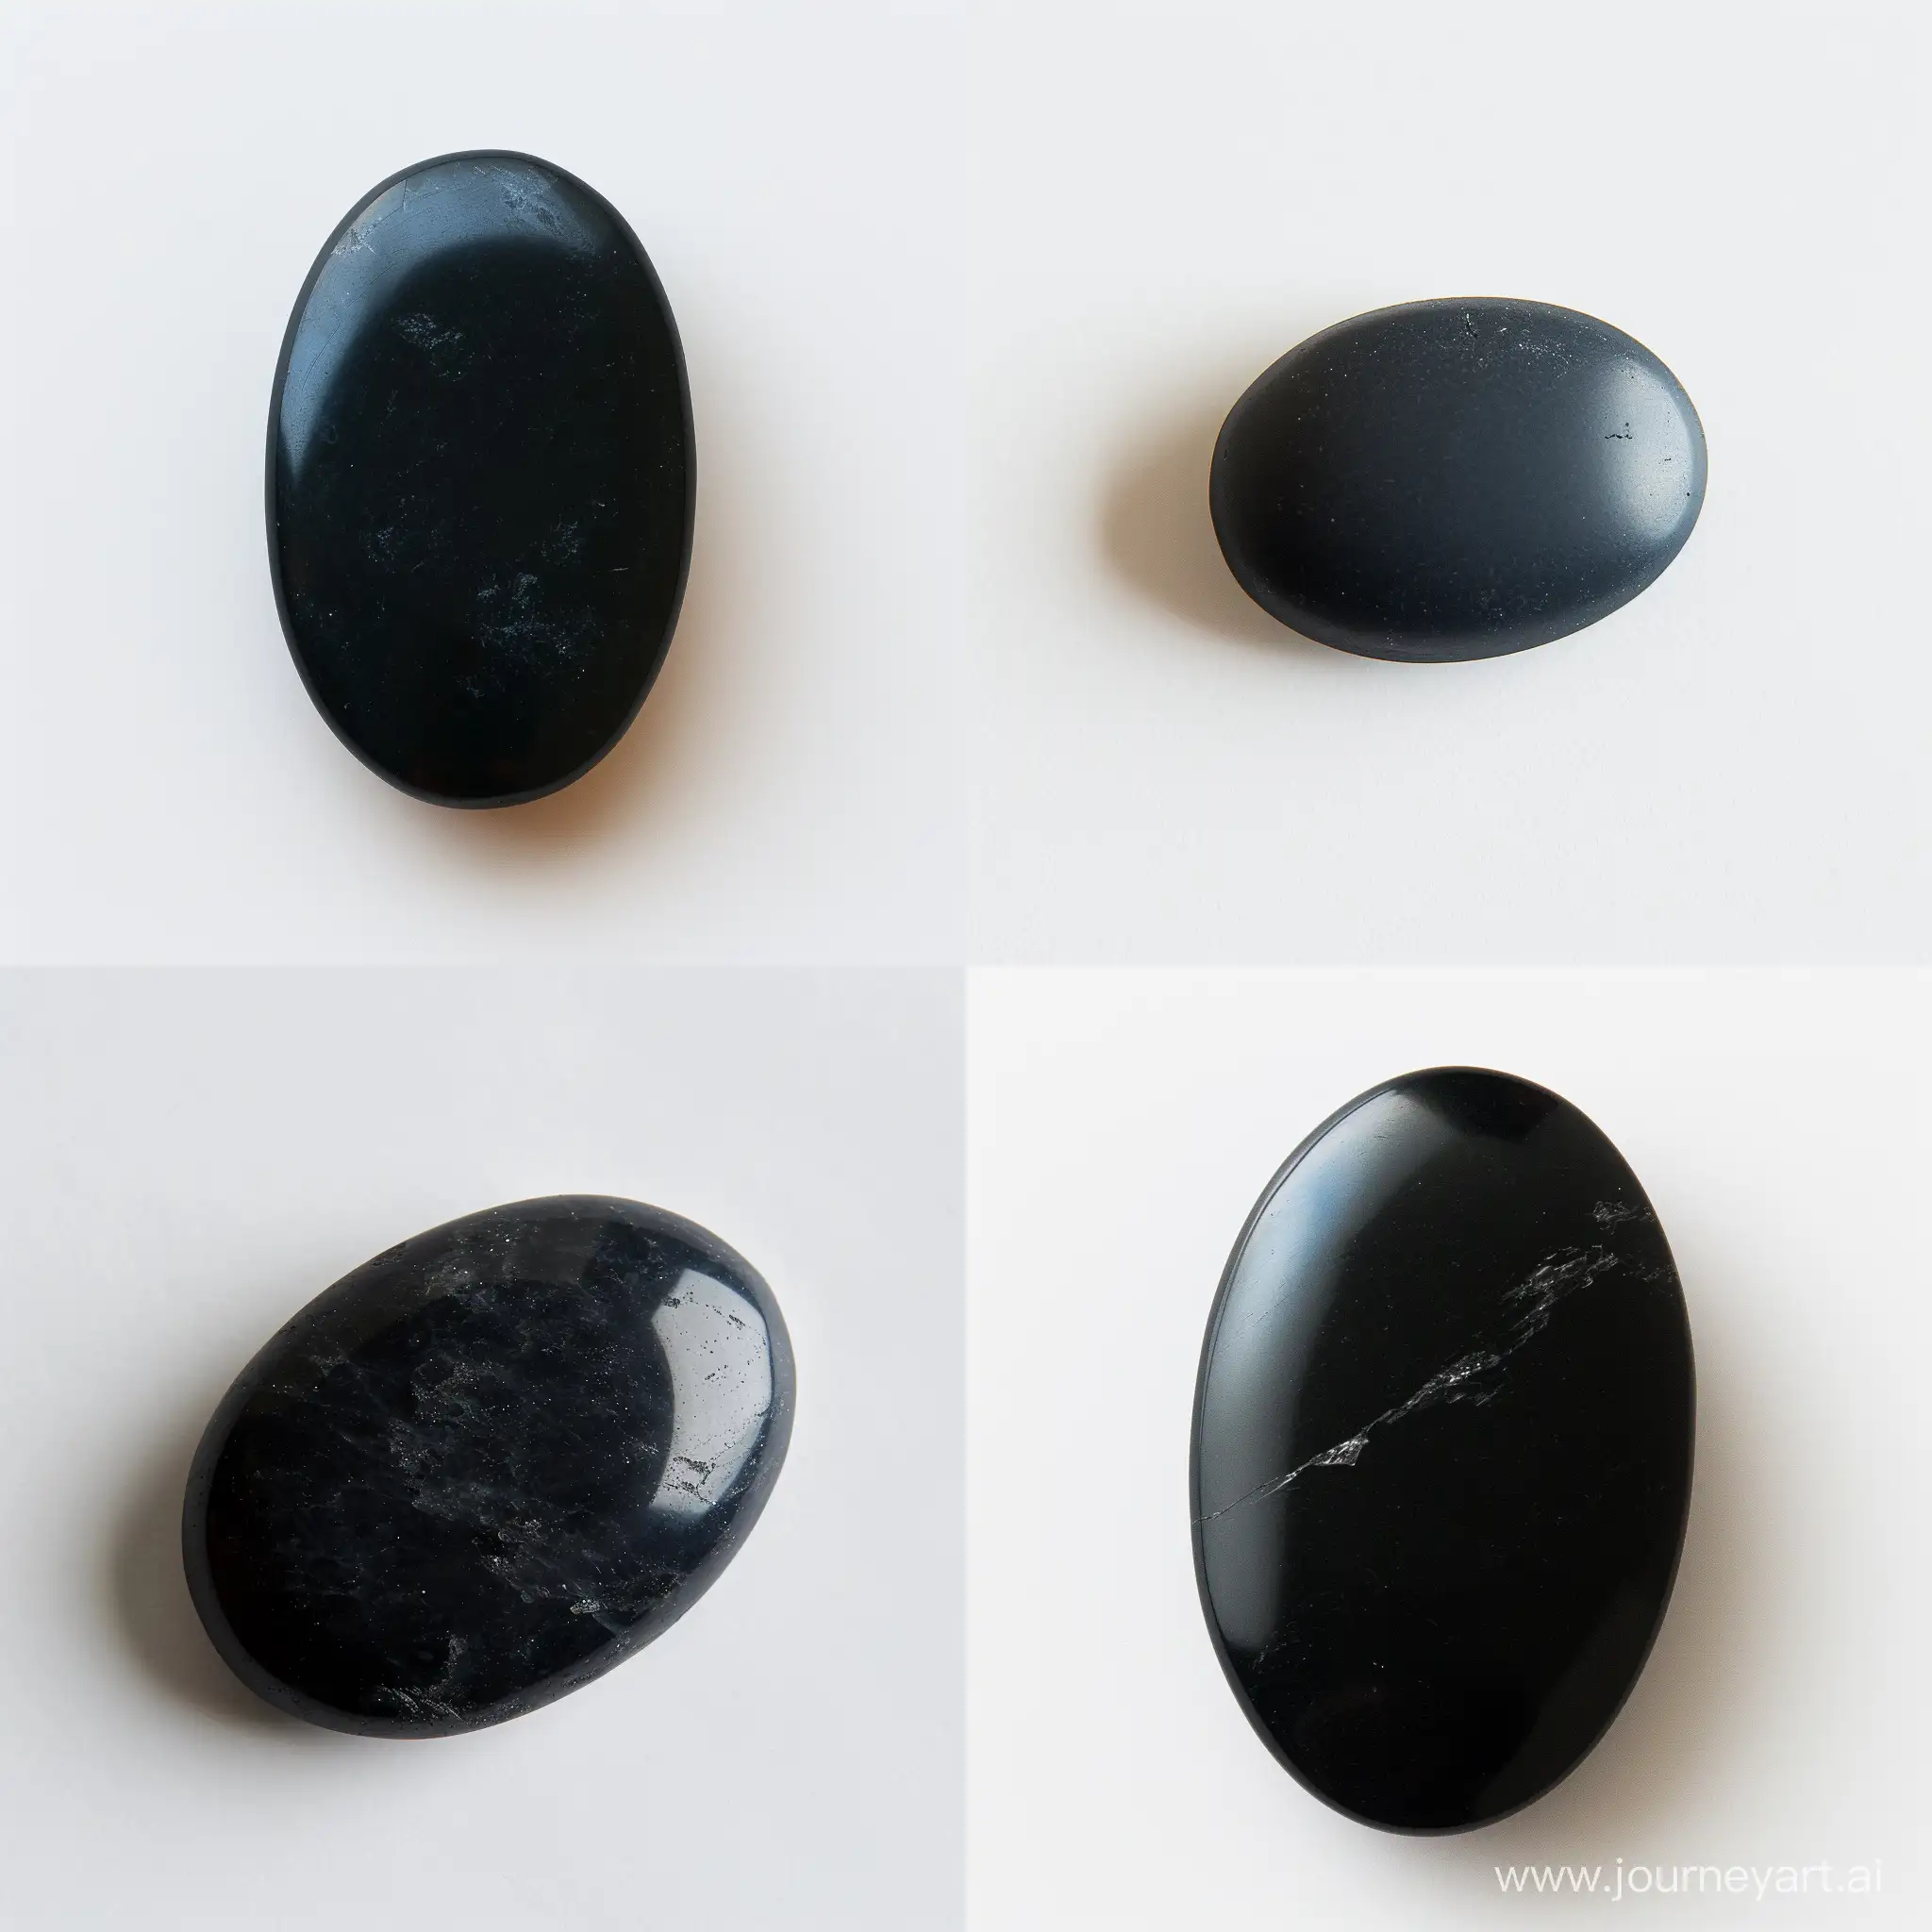 Solid stone + oval shape + dark black color + matte texture+ plain+slightly elongated horizontally + polished cabochon+ medium size+on a white background+view of the stone from above+on a light background, beautiful, stone in the middle of the picture
